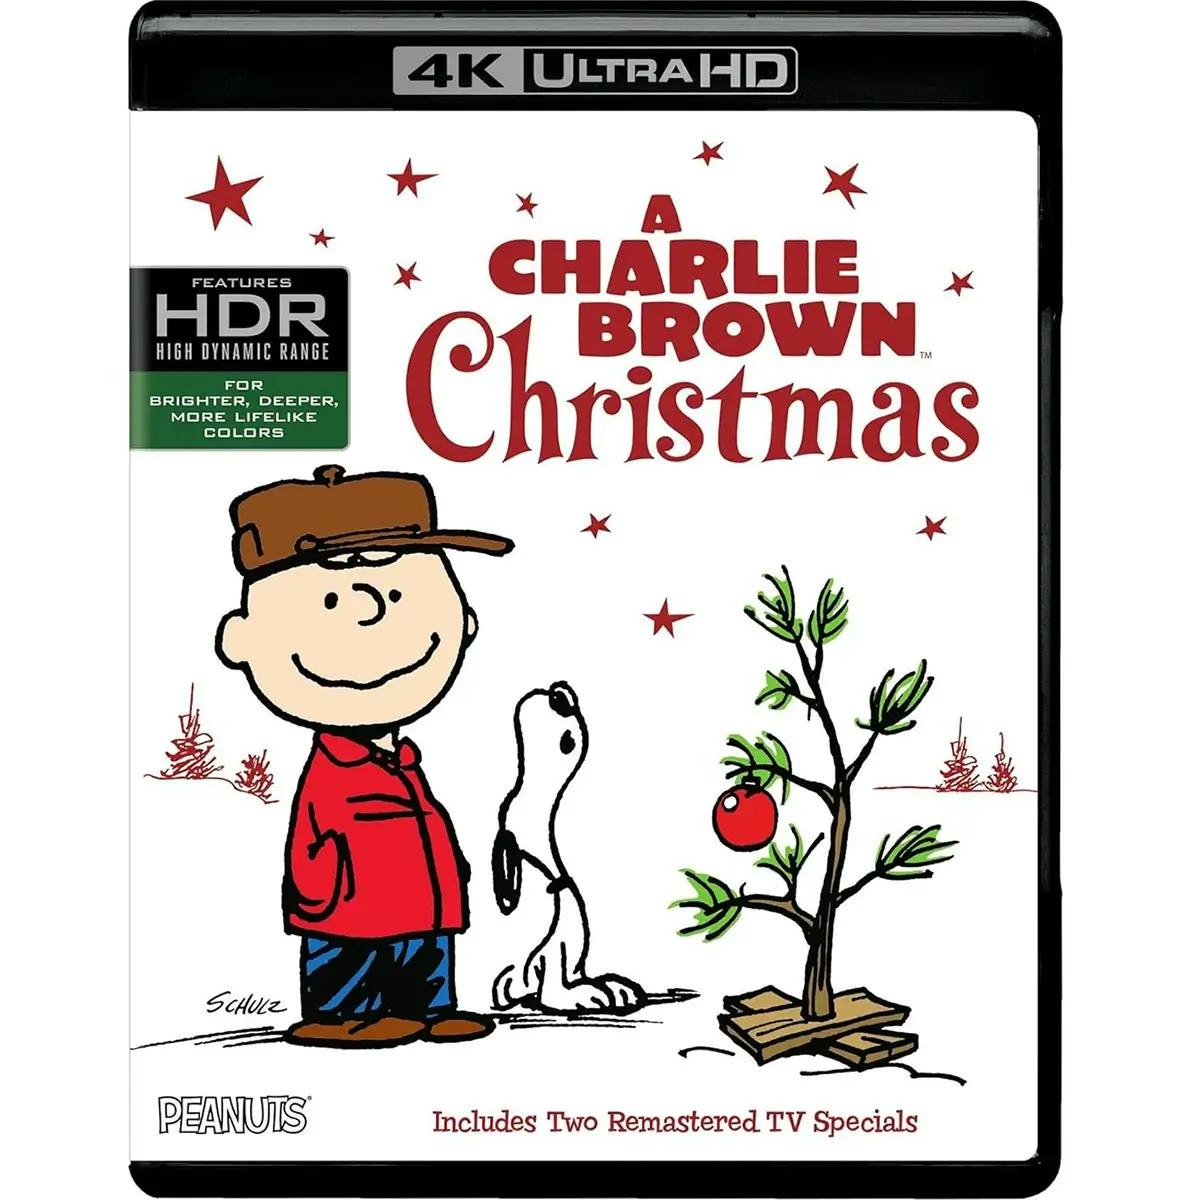 Box art for the 4K Blu-ray version of the Christmas movie, “A Charlie Brown Christmas.”